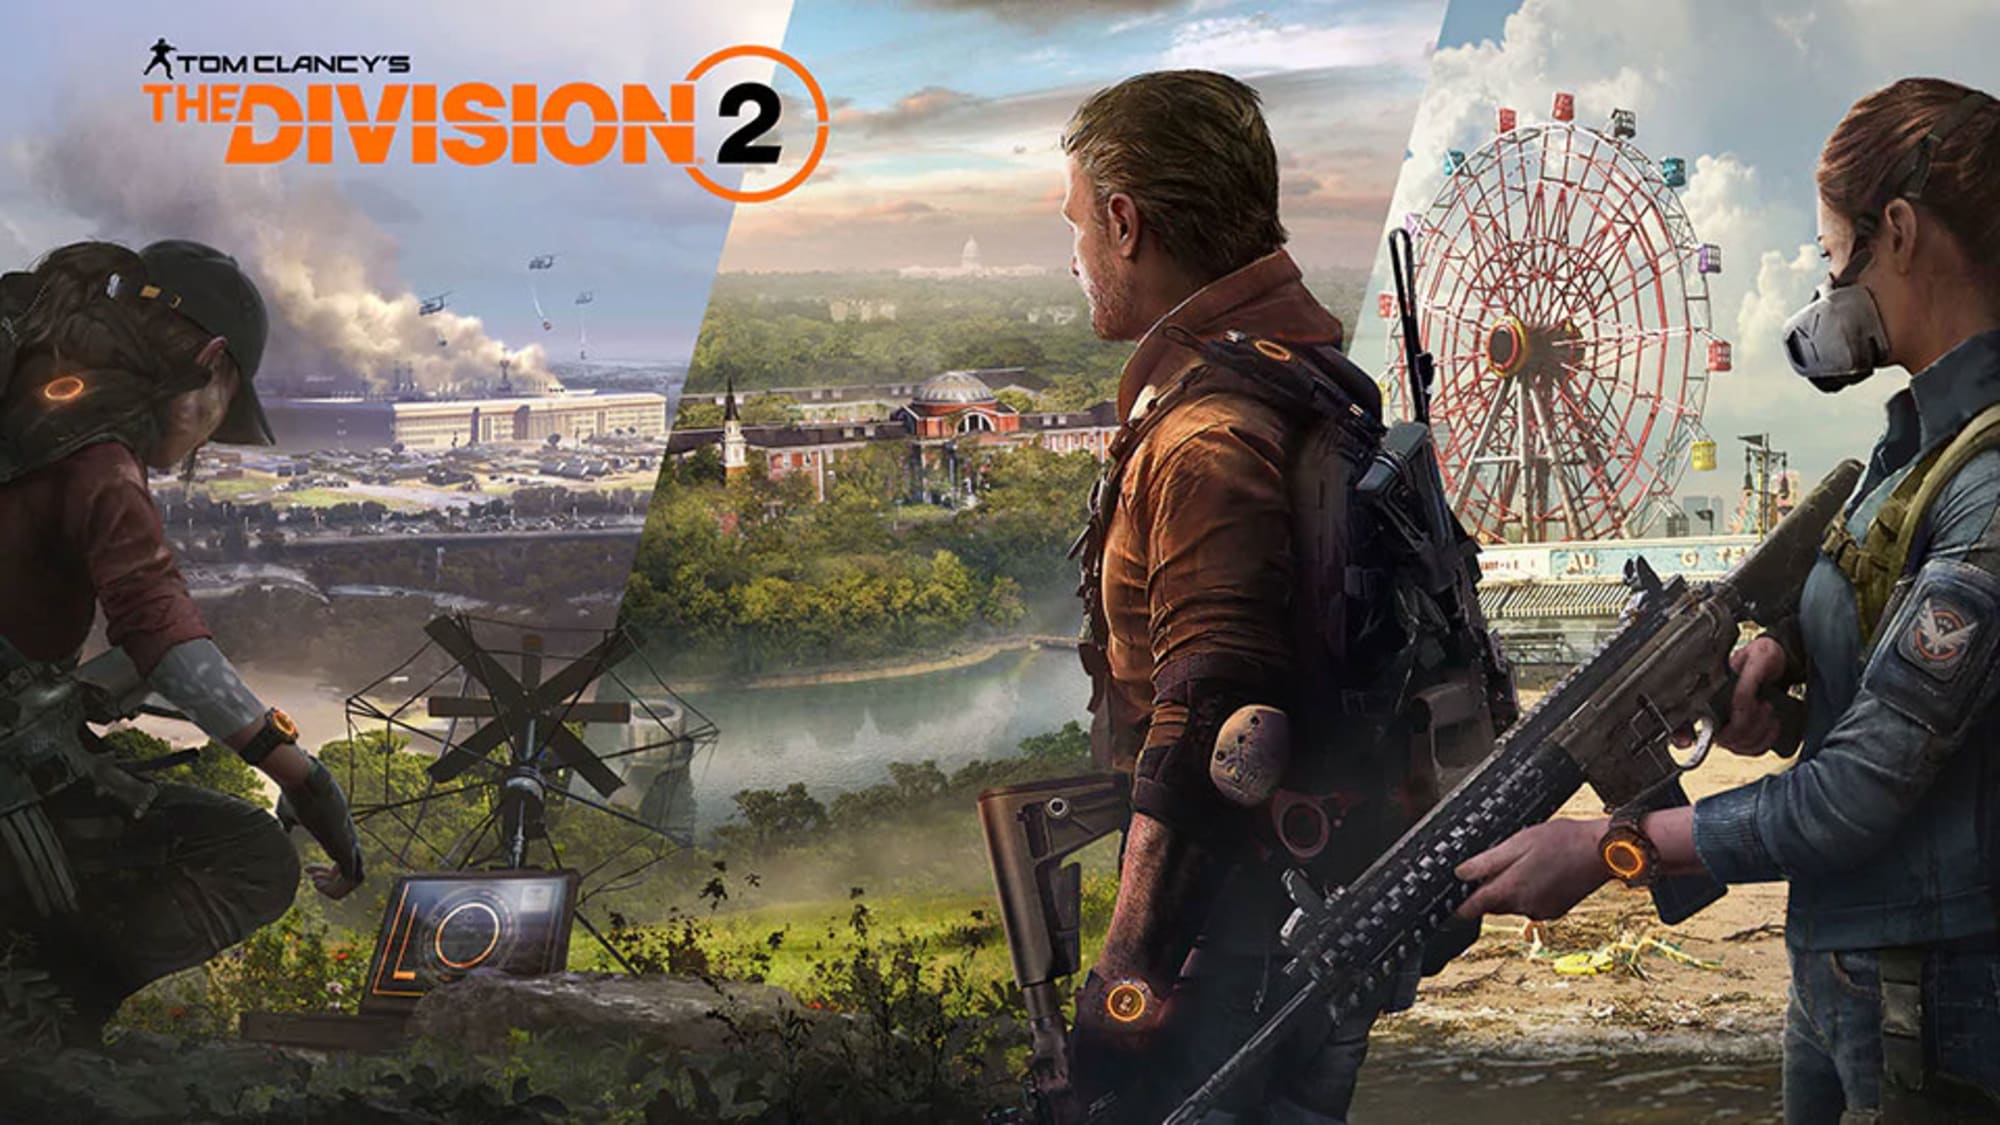 The Division 2 Second Raid And A Return To Nyc Confirmed In Episodes 2 And 3